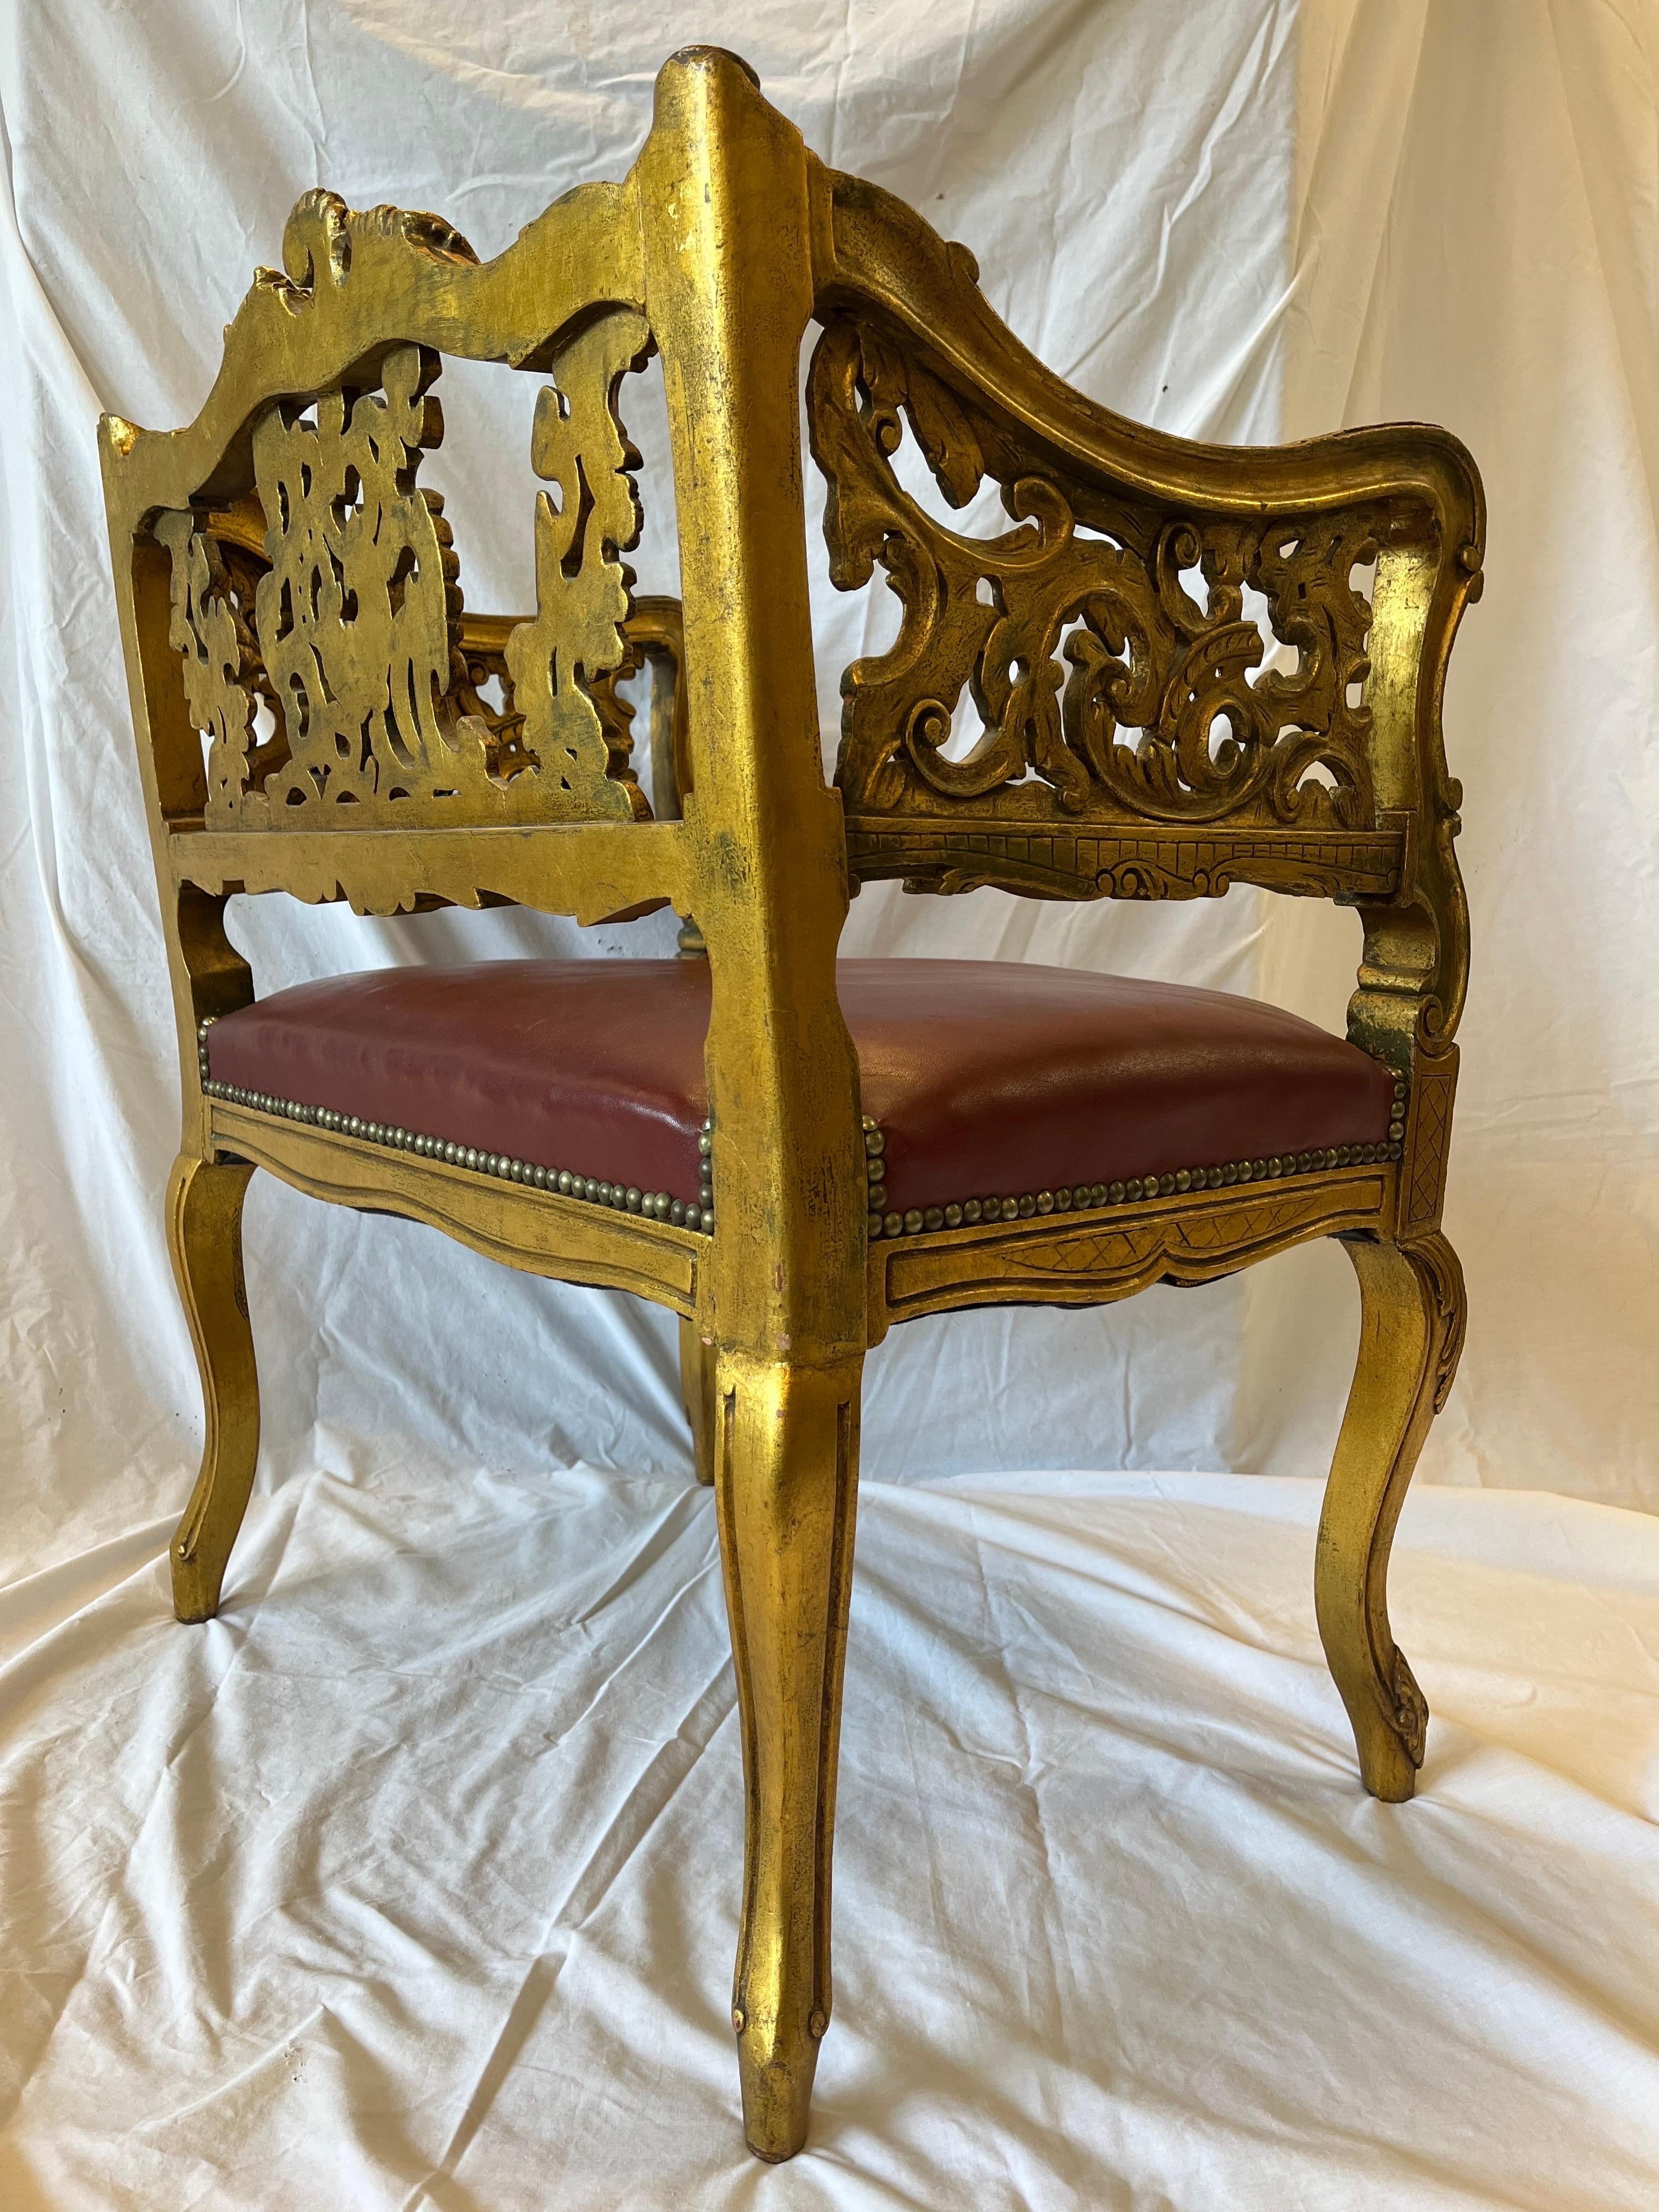 Antique Carved and Gilt Wood Arm Chair Bench Ornate Design Red Upholstered Seat For Sale 7